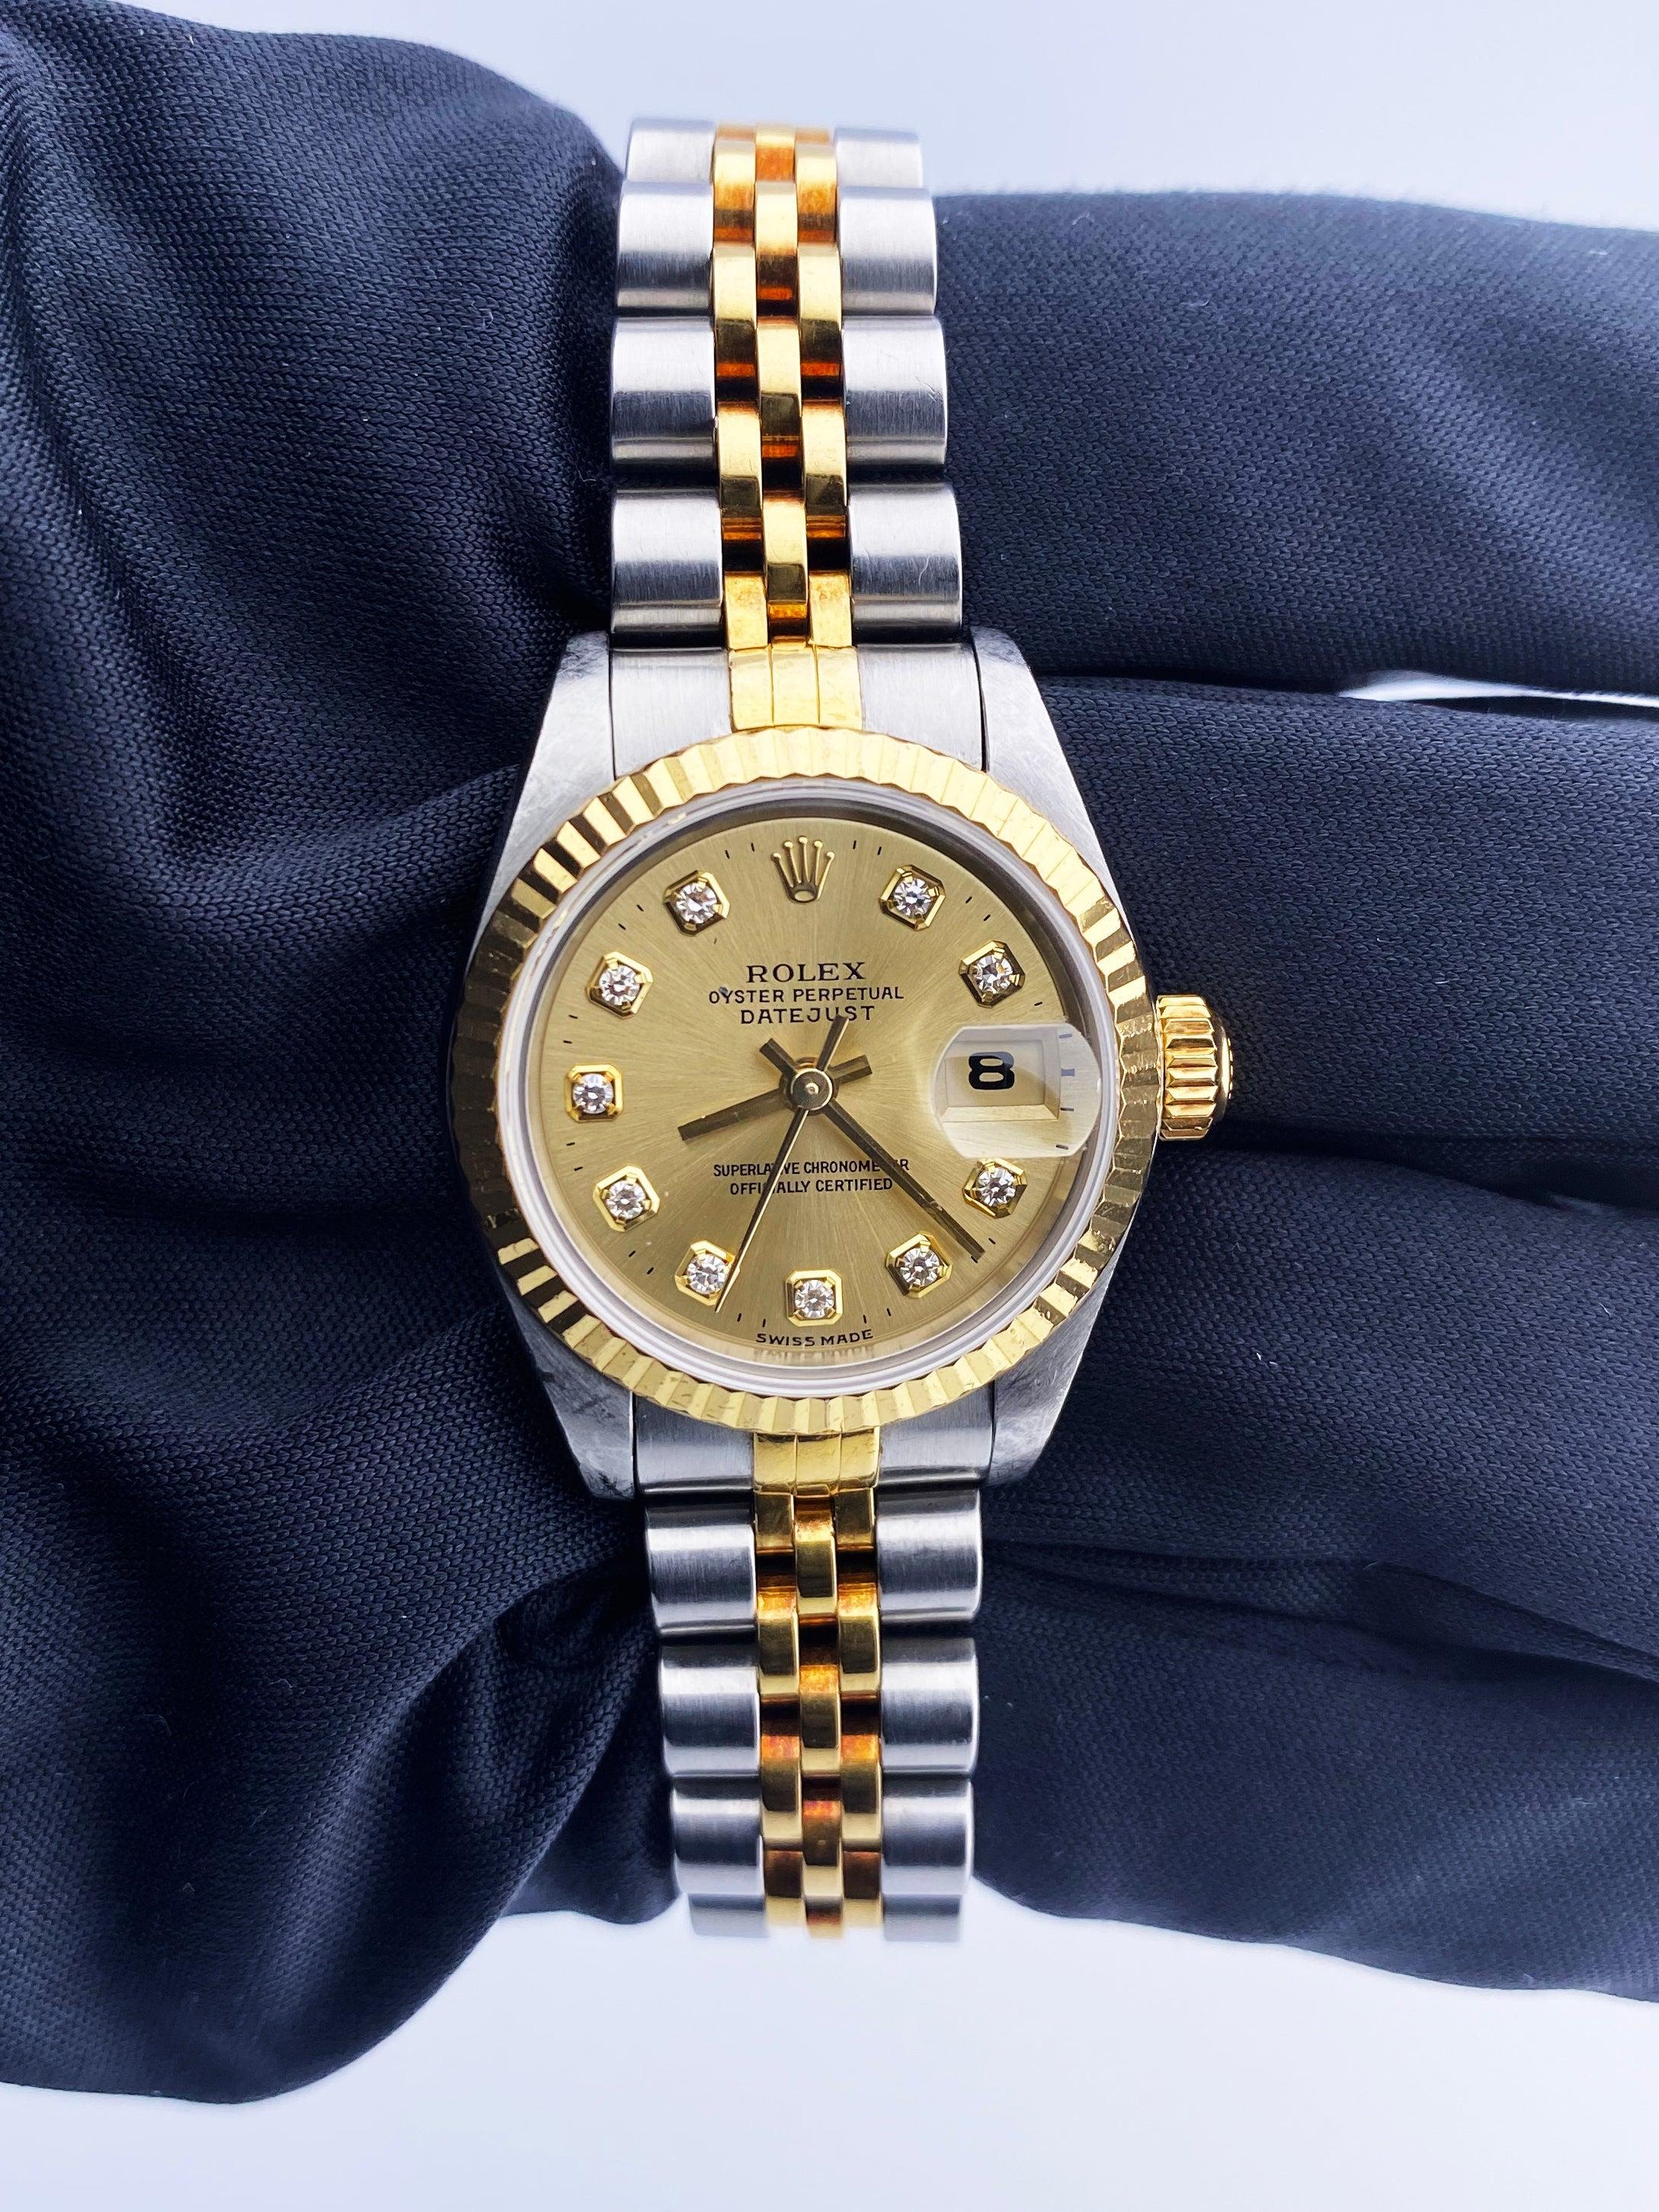 Rolex Oyster Perpetual Datejust 69173 Ladies Watch. 26mm stainless steel case. 18k yellow gold fluted bezel. Champagne dial with yellow gold hands and original factory diamond set hour markers. Magnified date display at 3 o'clock position. 18k